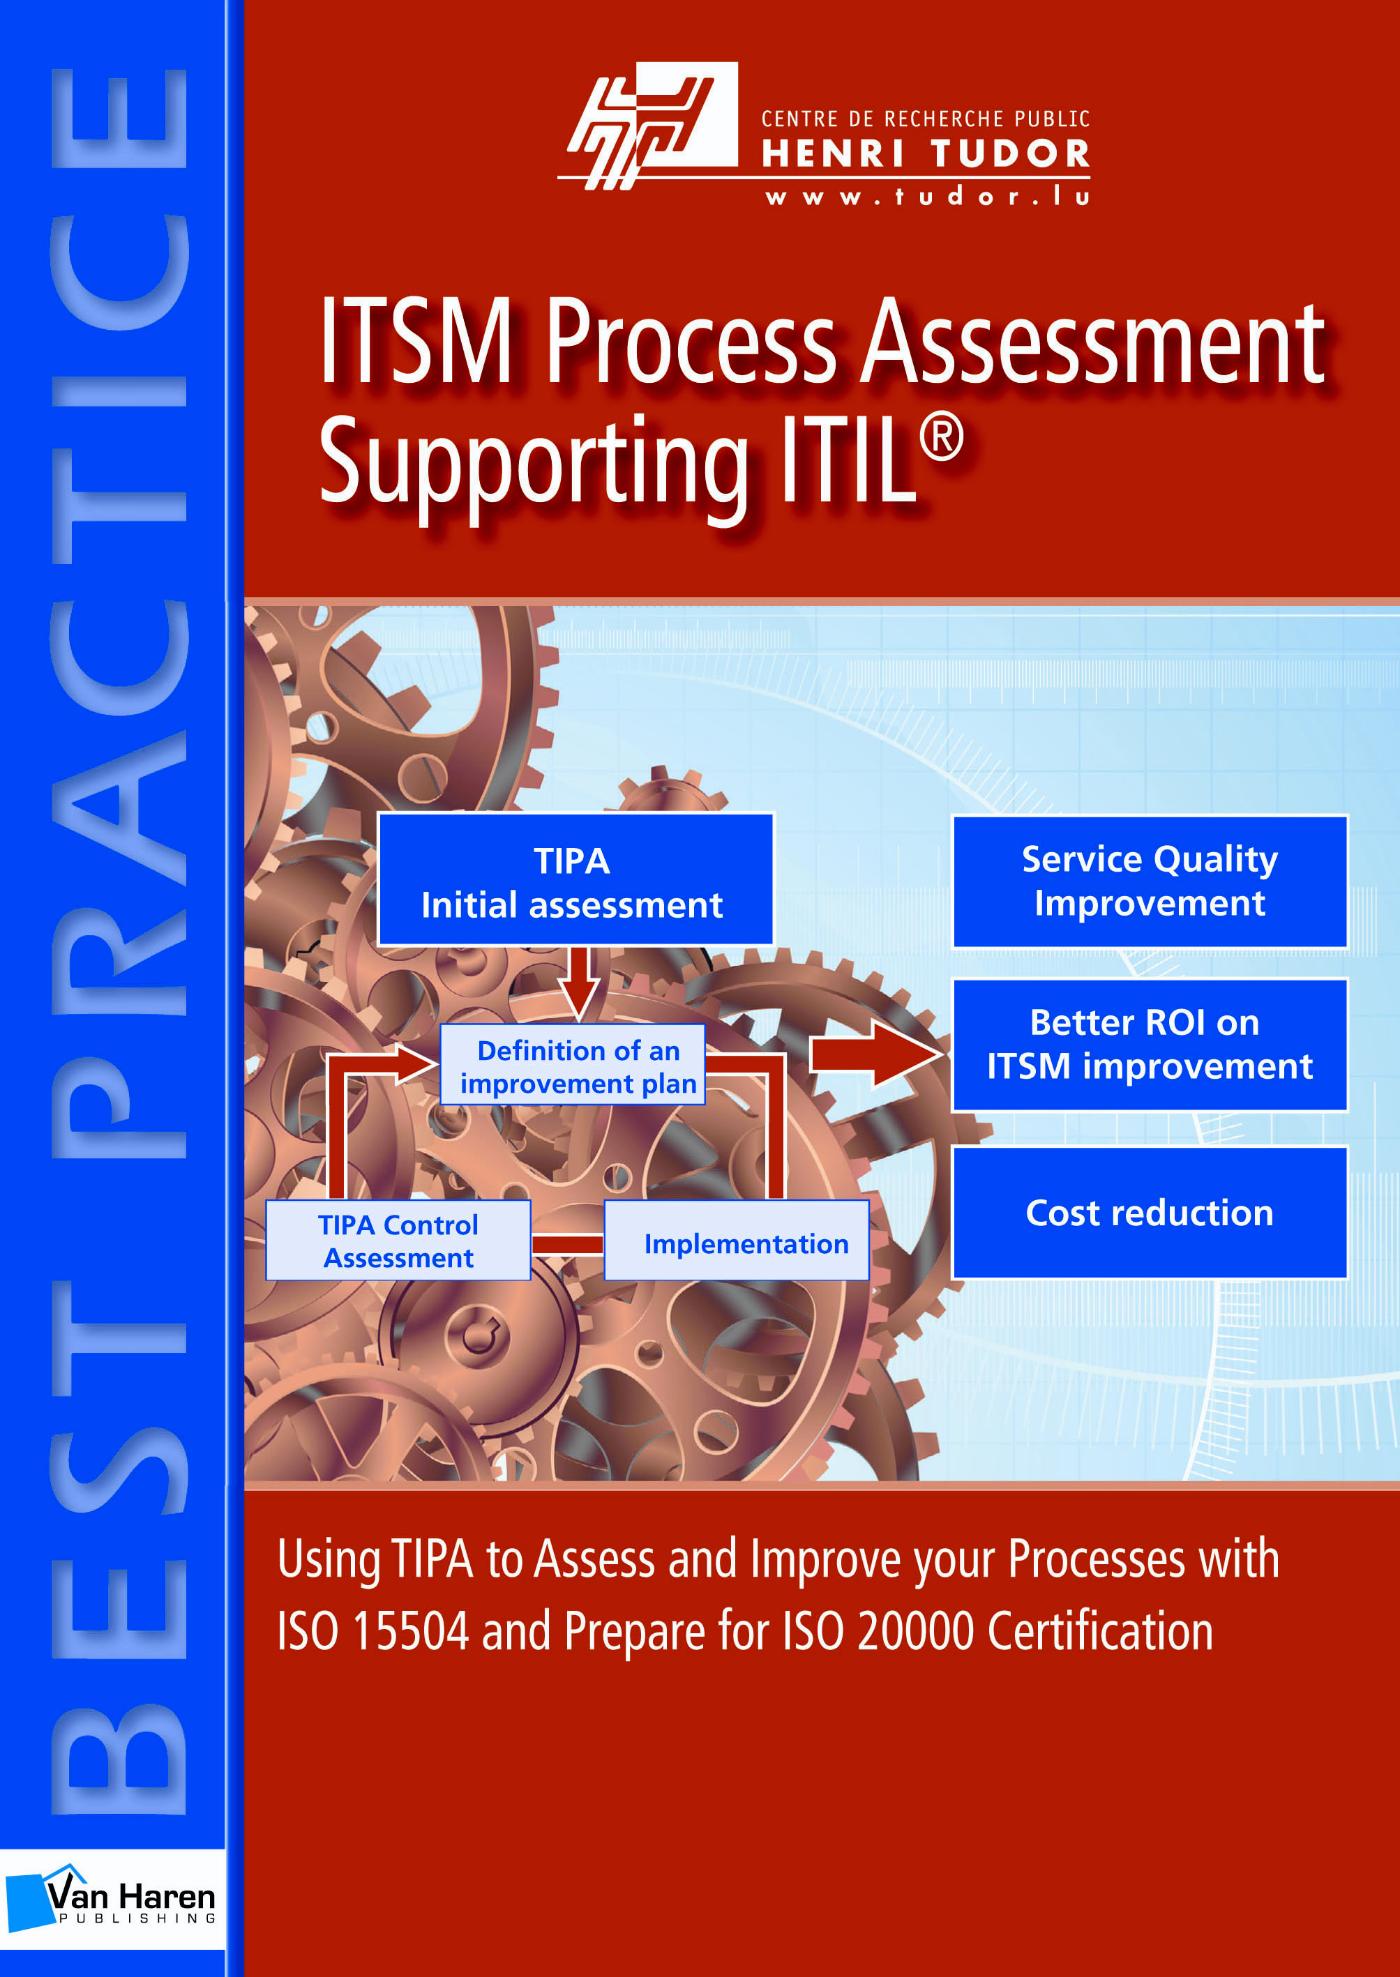 ITSM Process Assessment Supporting ITIL (Ebook)